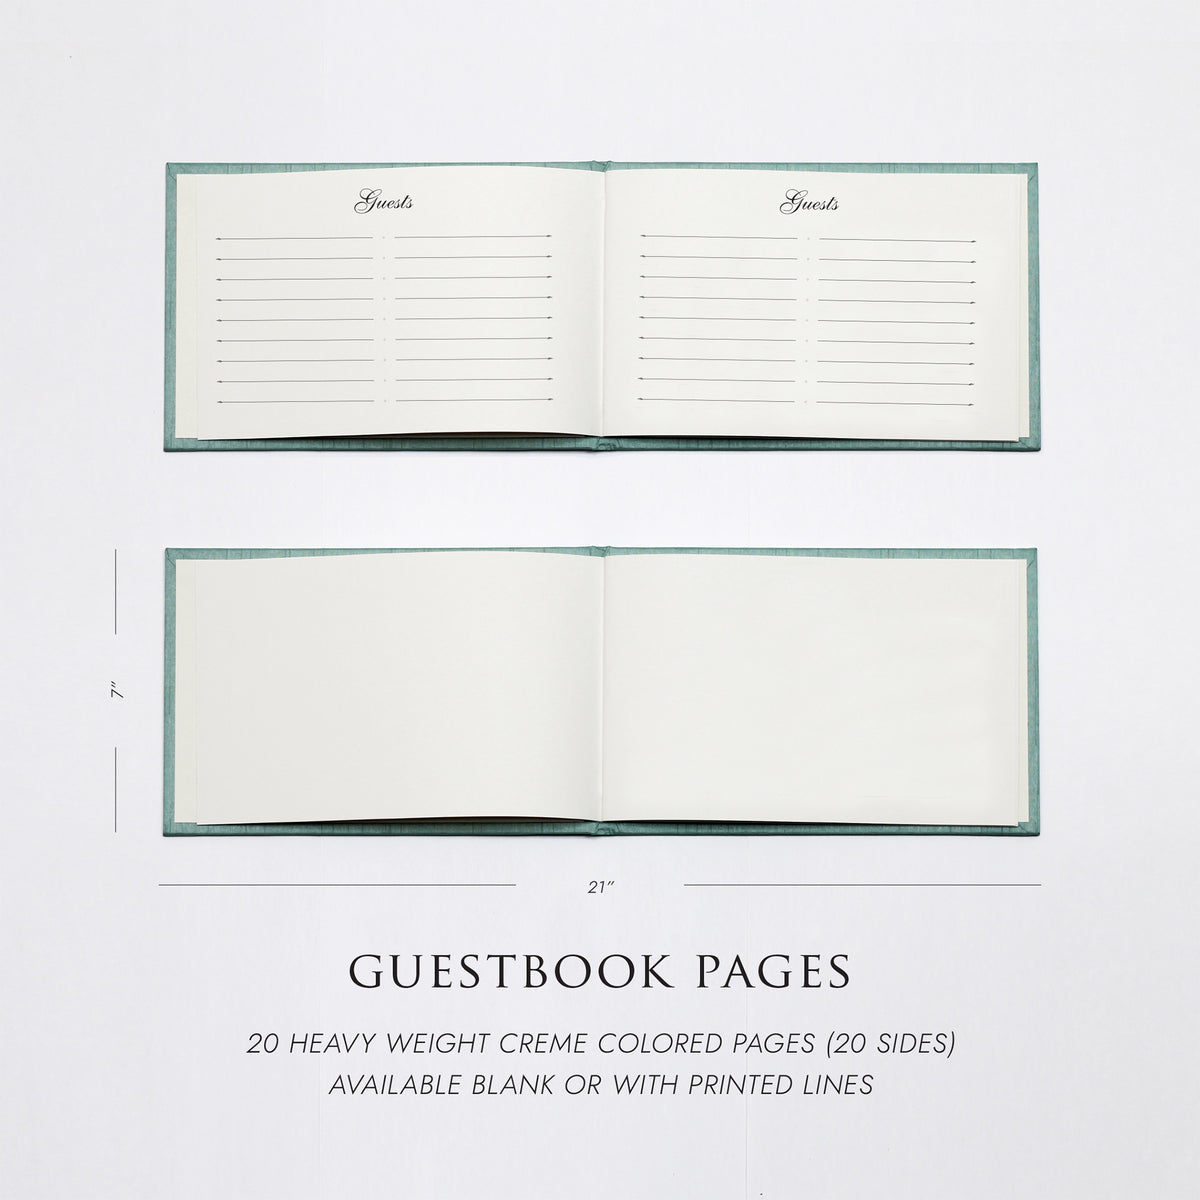 Guestbook Embossed with “Guests” | Cover: Pastel Blue Cotton | Available Personalized